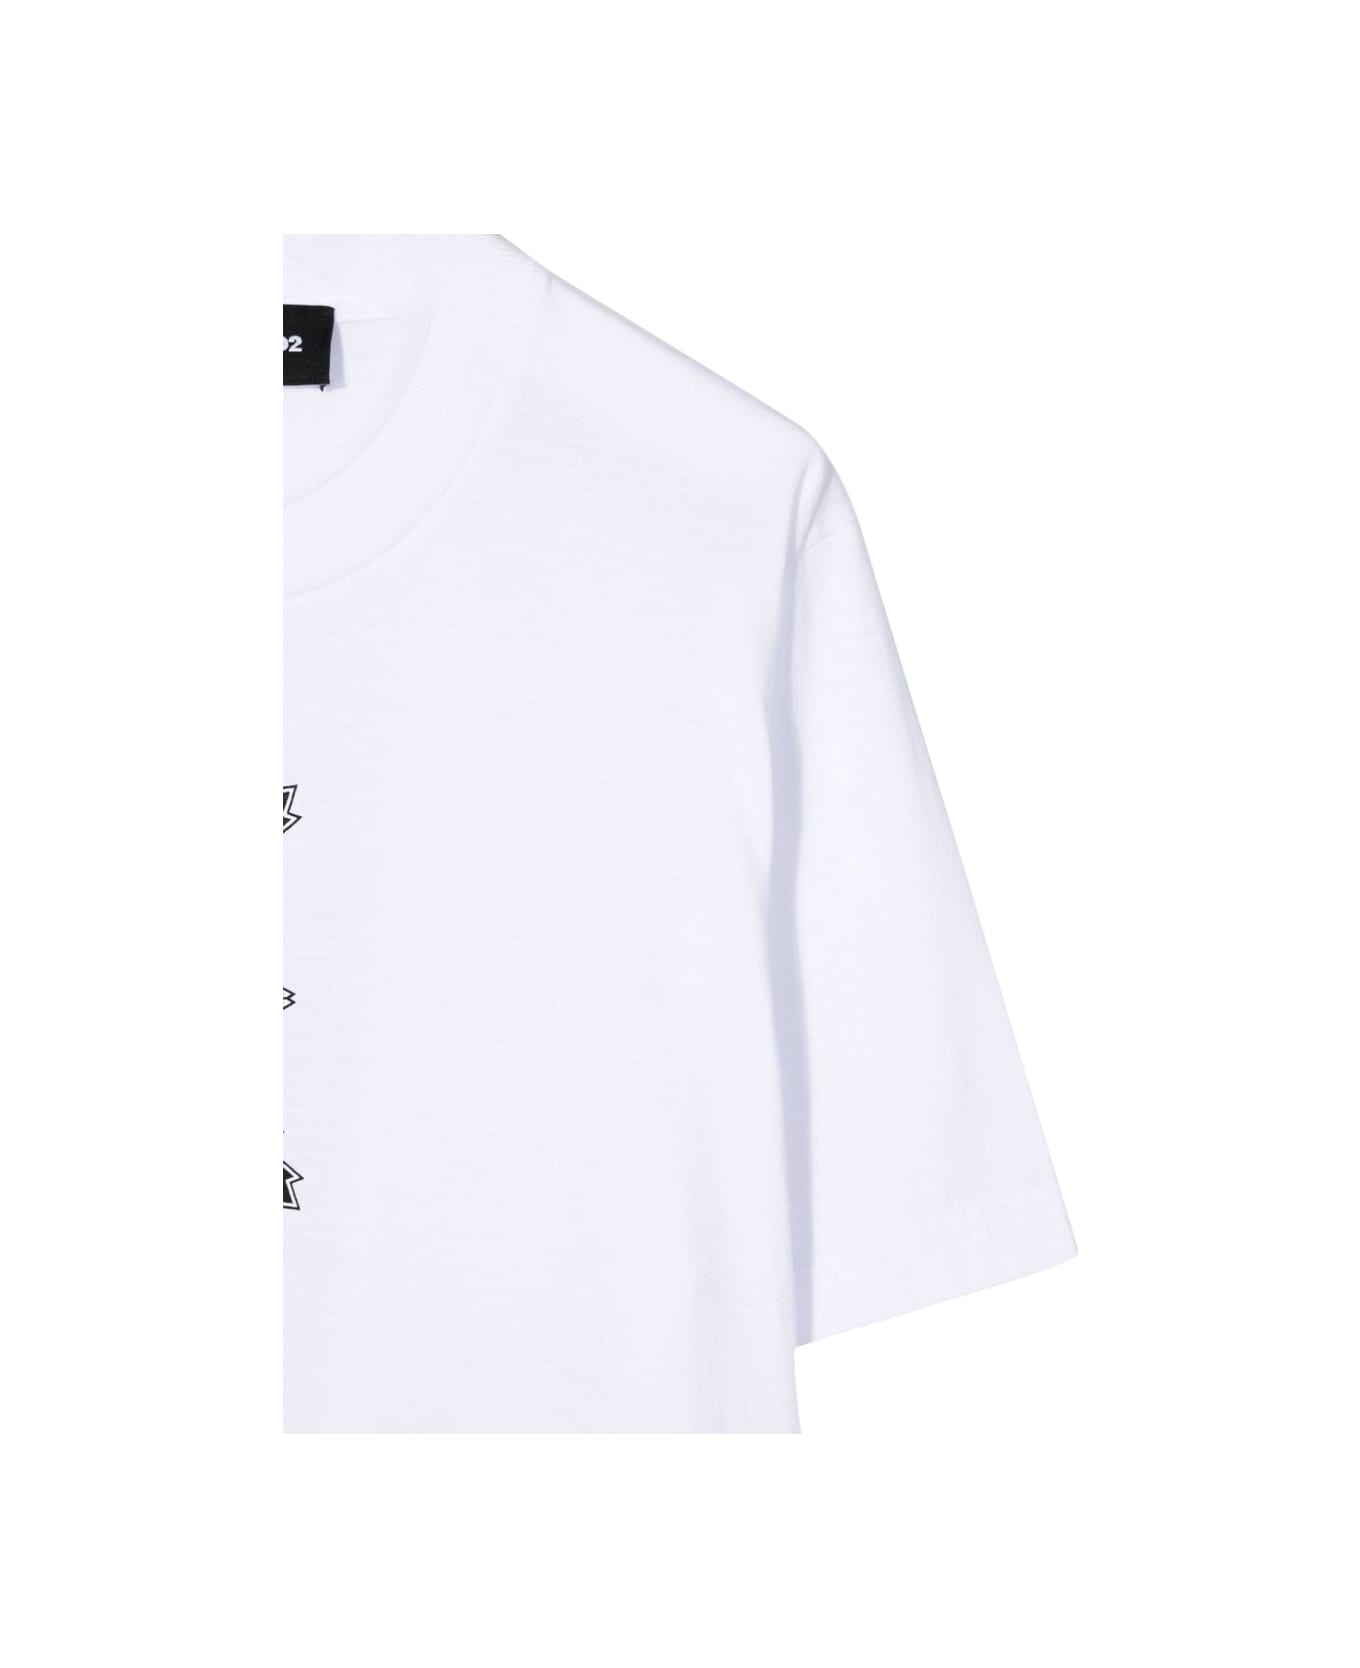 Dsquared2 T-shirt Logo On The Back And Front Leaves - WHITE Tシャツ＆ポロシャツ